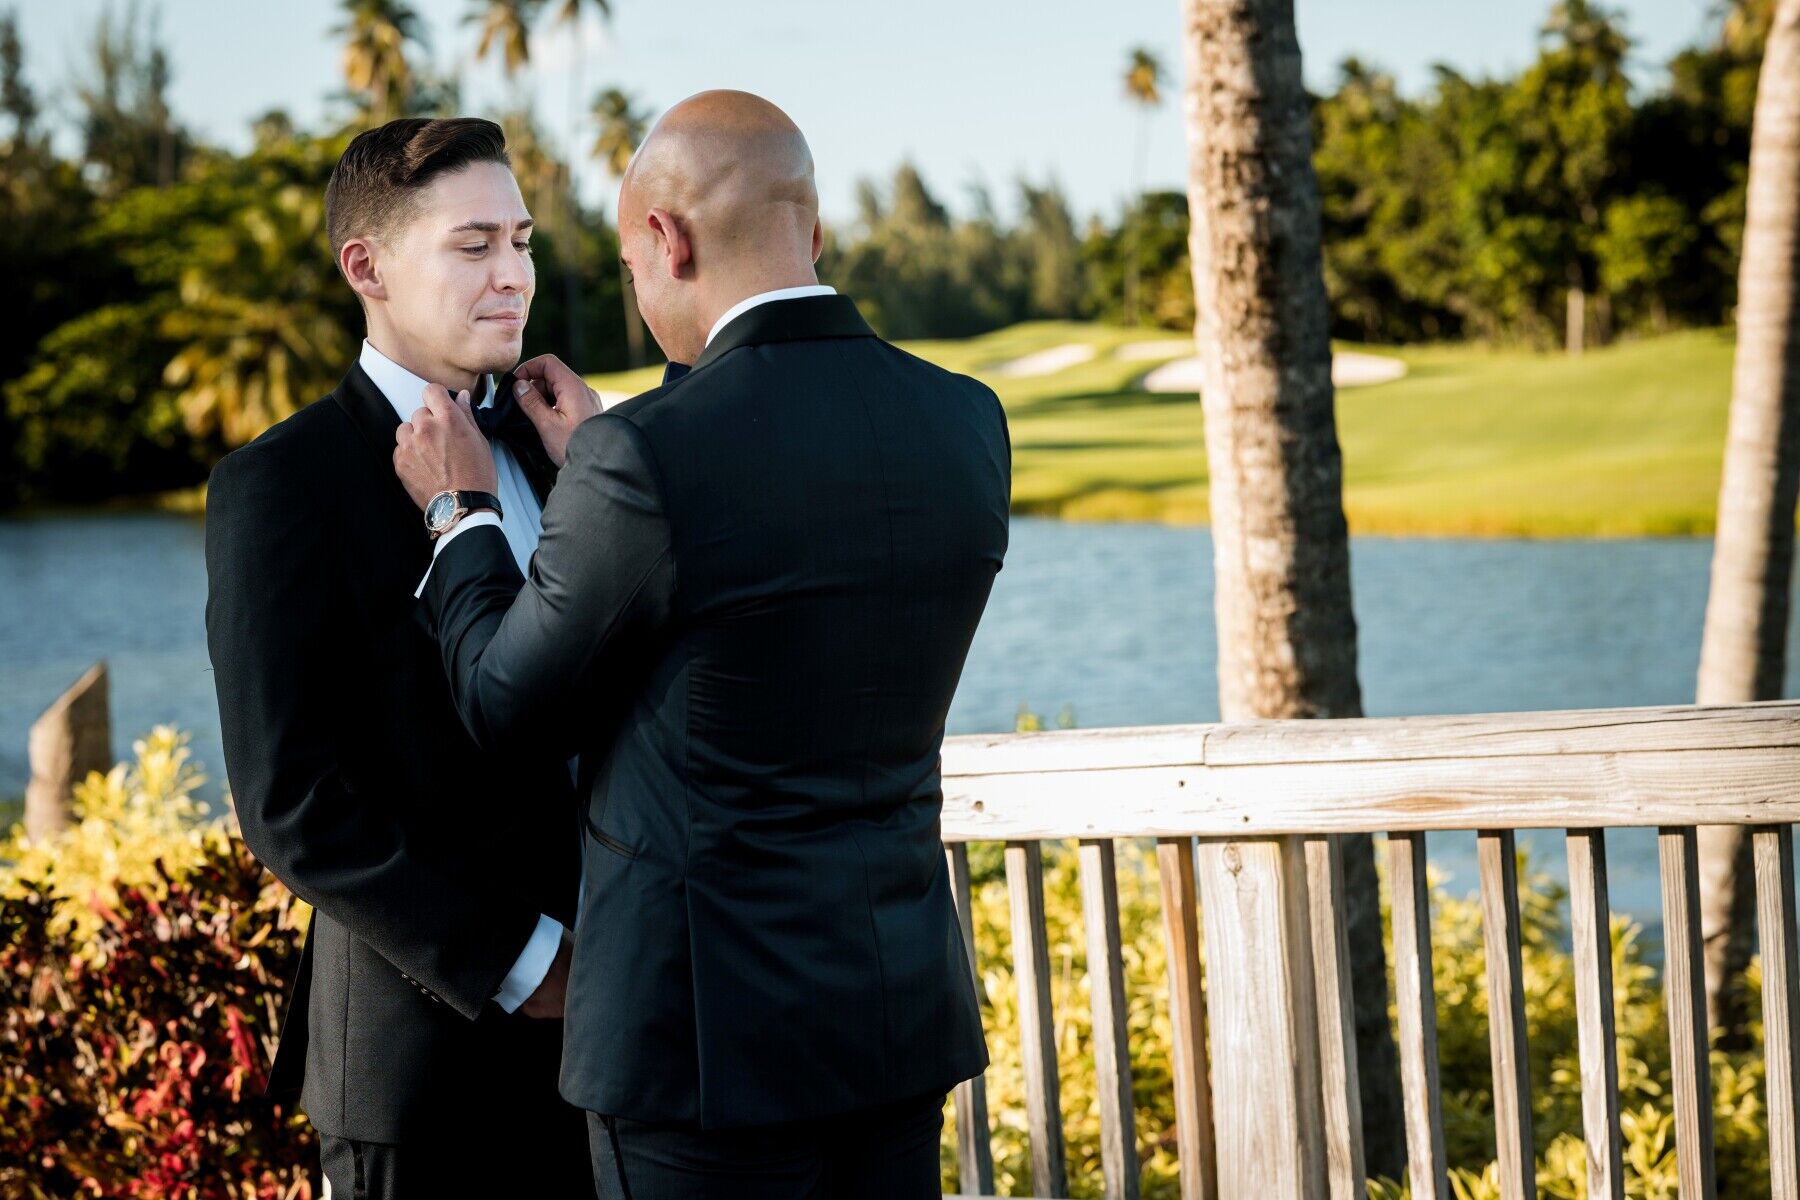 Golf Course Wedding Venues: A groom adjusts his groom's tie on their wedding day.